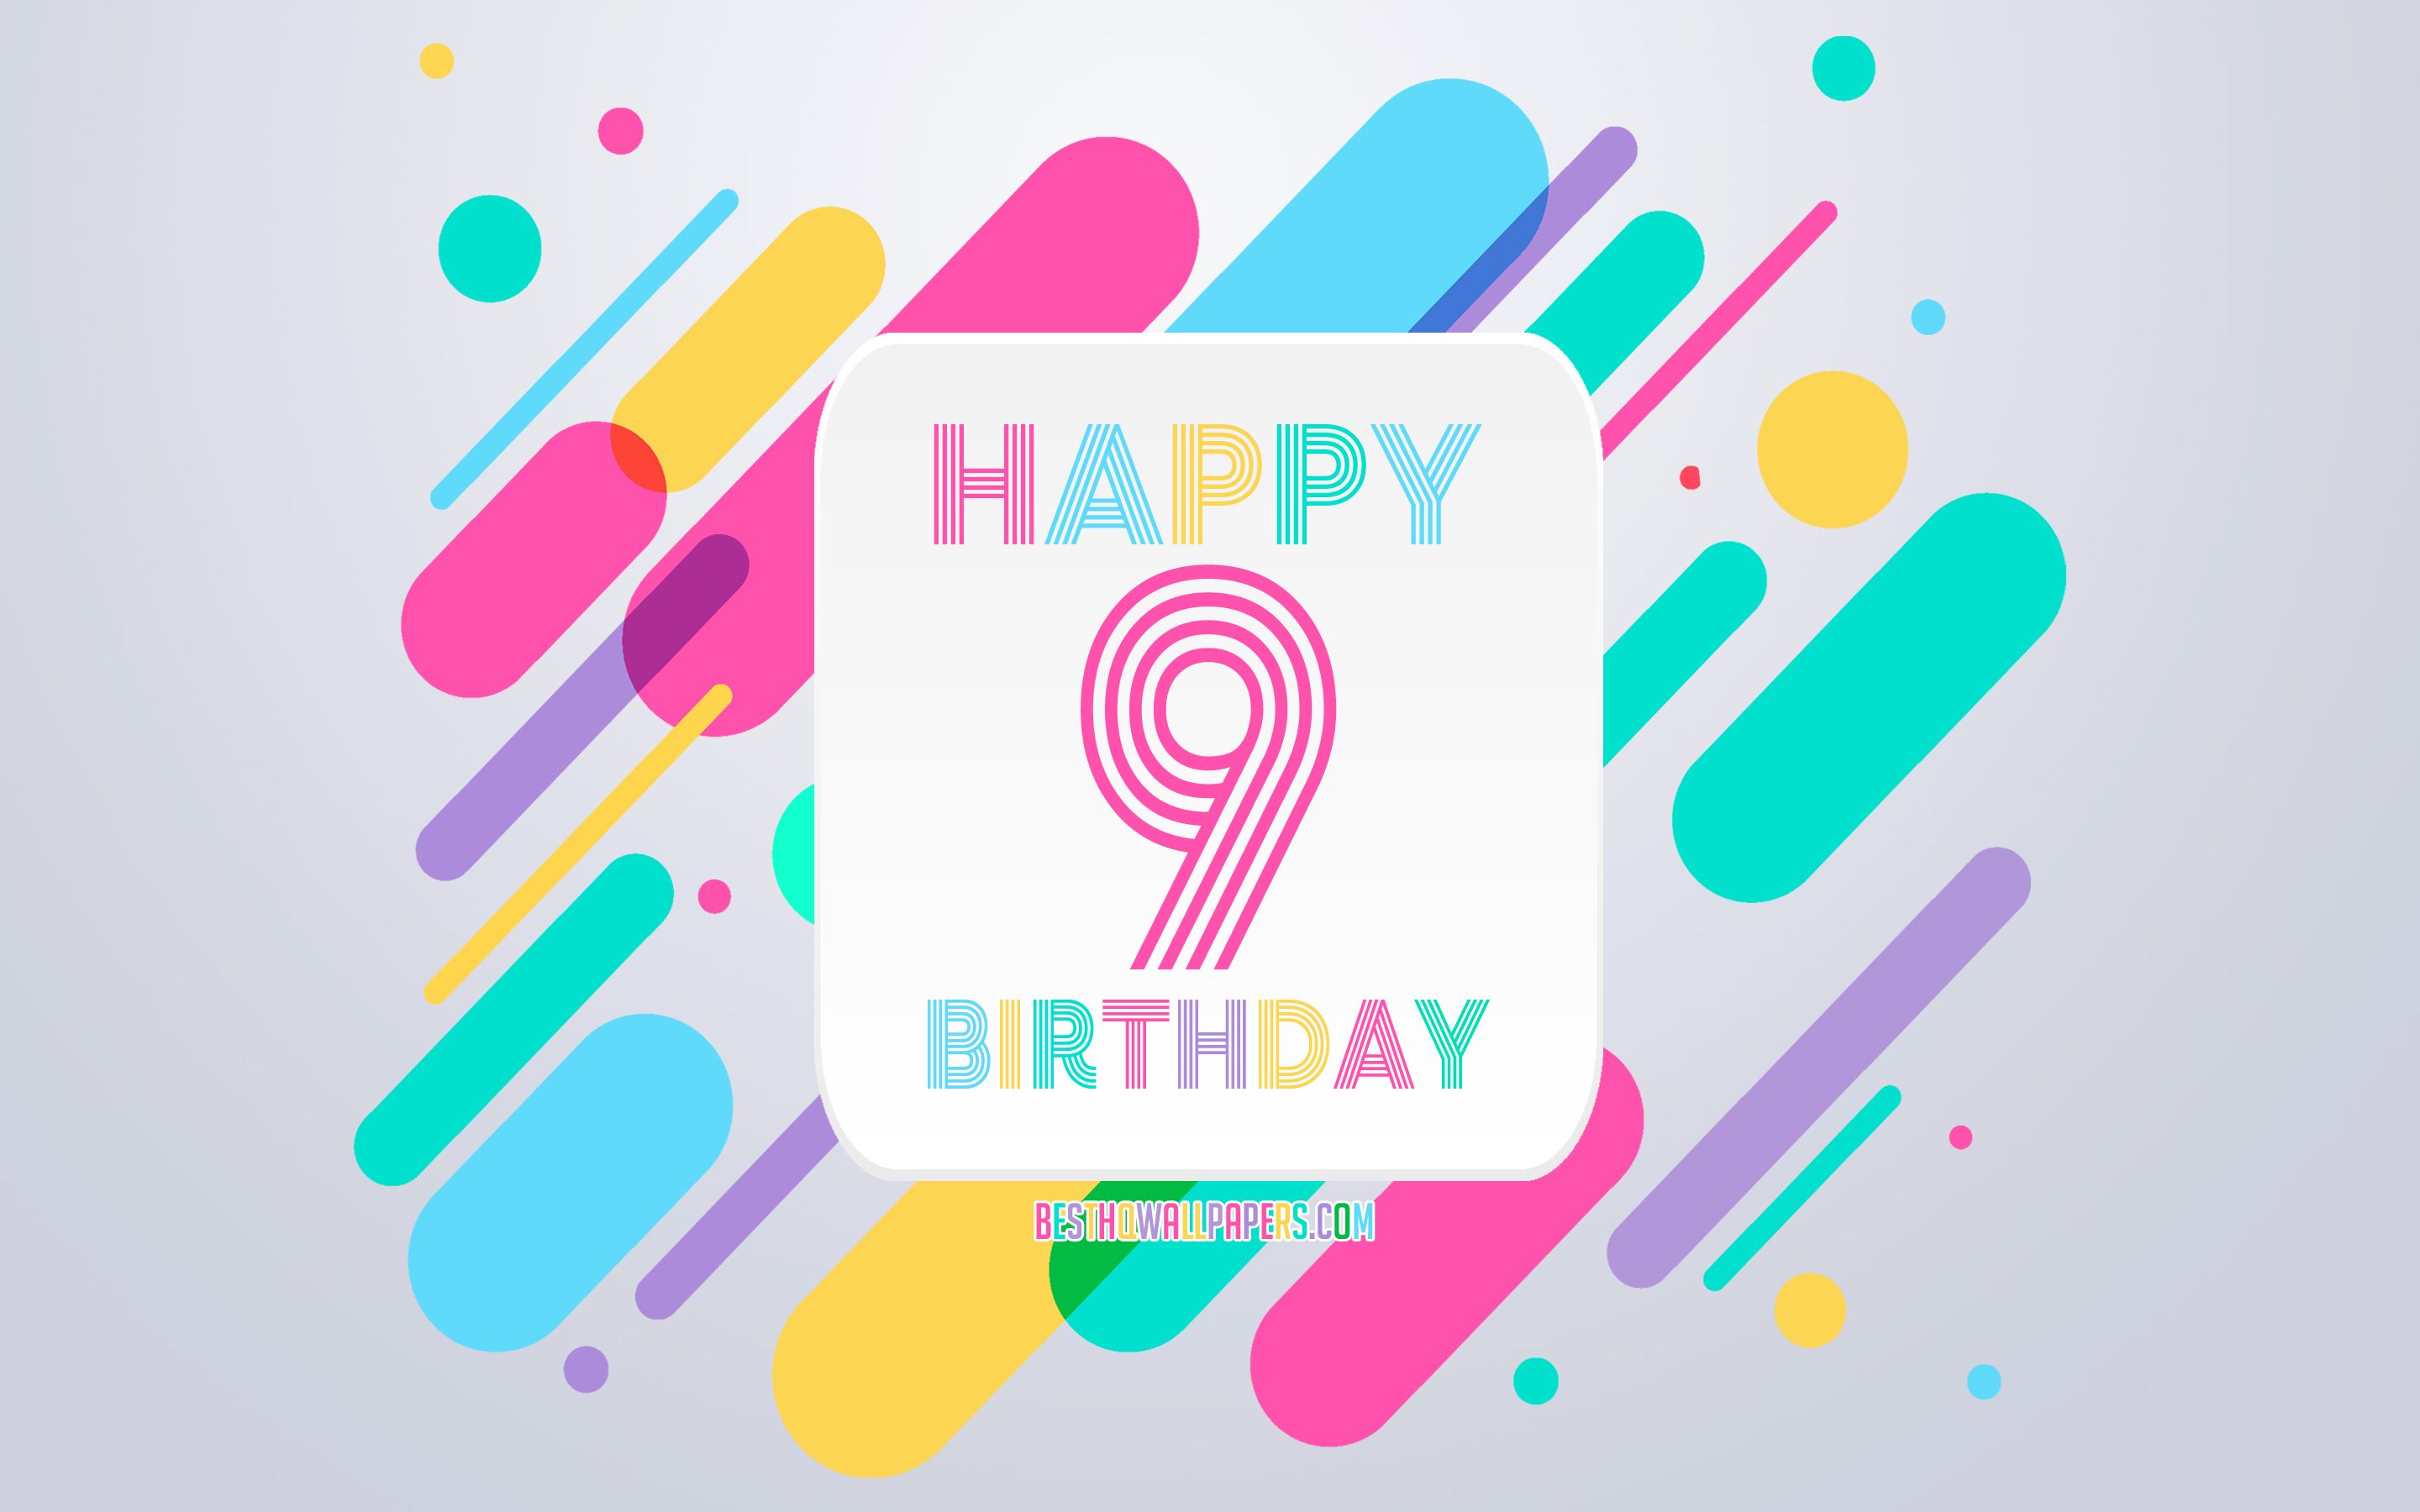 Download wallpaper Happy 9 Years Birthday, Abstract Birthday Background, Happy 9th Birthday, Colorful Abstraction, 9th Happy Birthday, Birthday lines background, 9 Years Birthday, 9 Years Birthday party for desktop with resolution 2880x1800